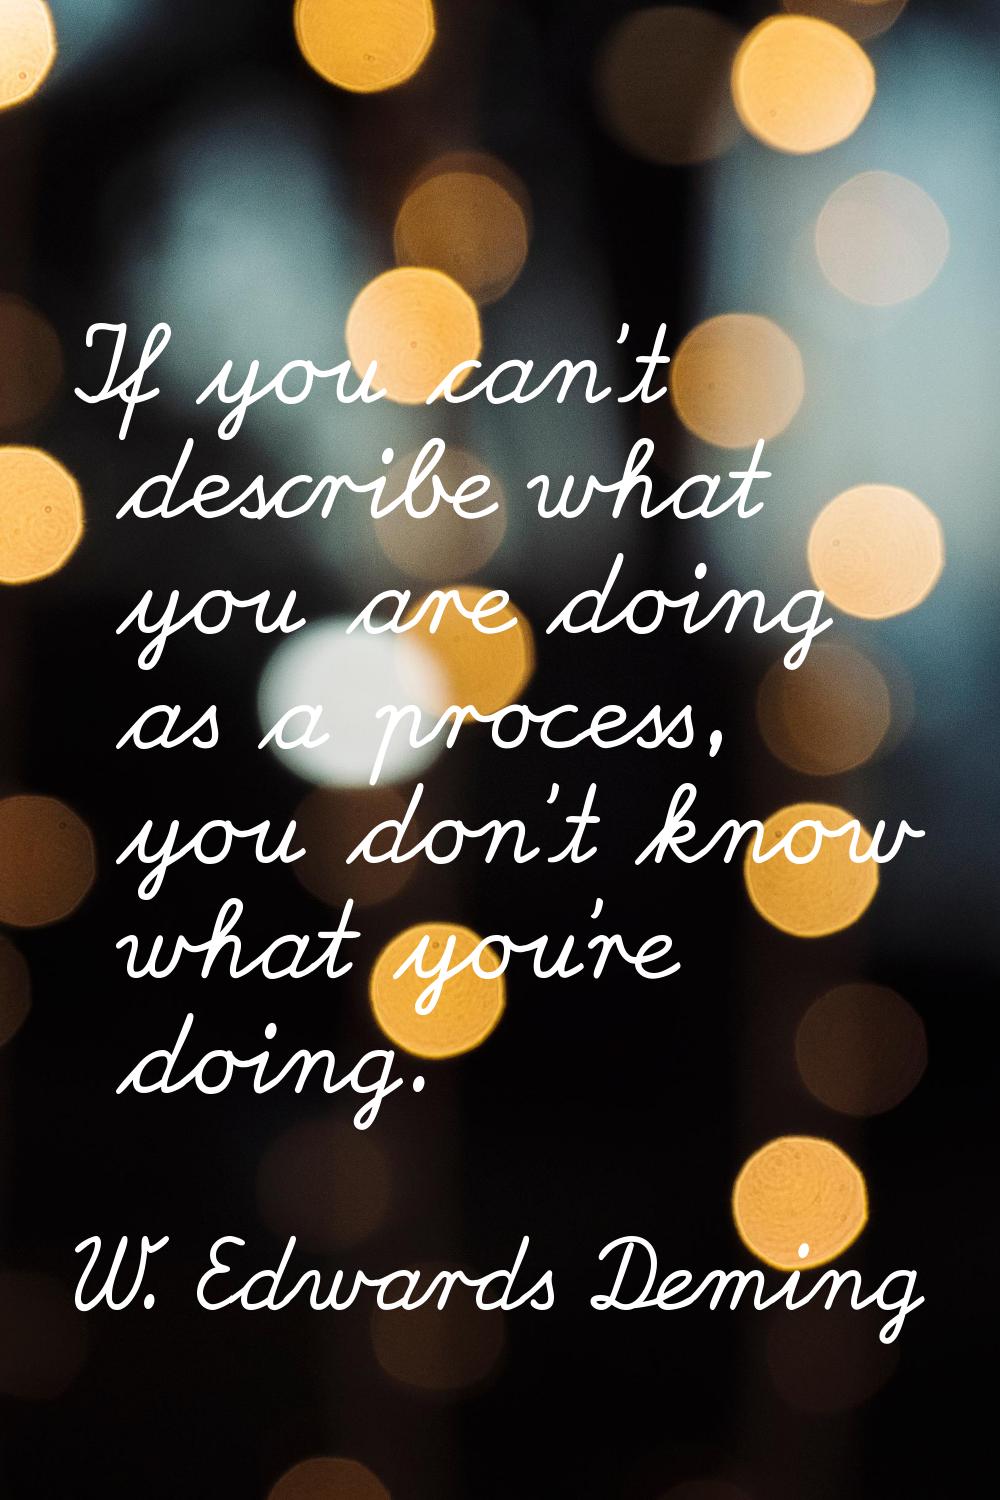 If you can't describe what you are doing as a process, you don't know what you're doing.